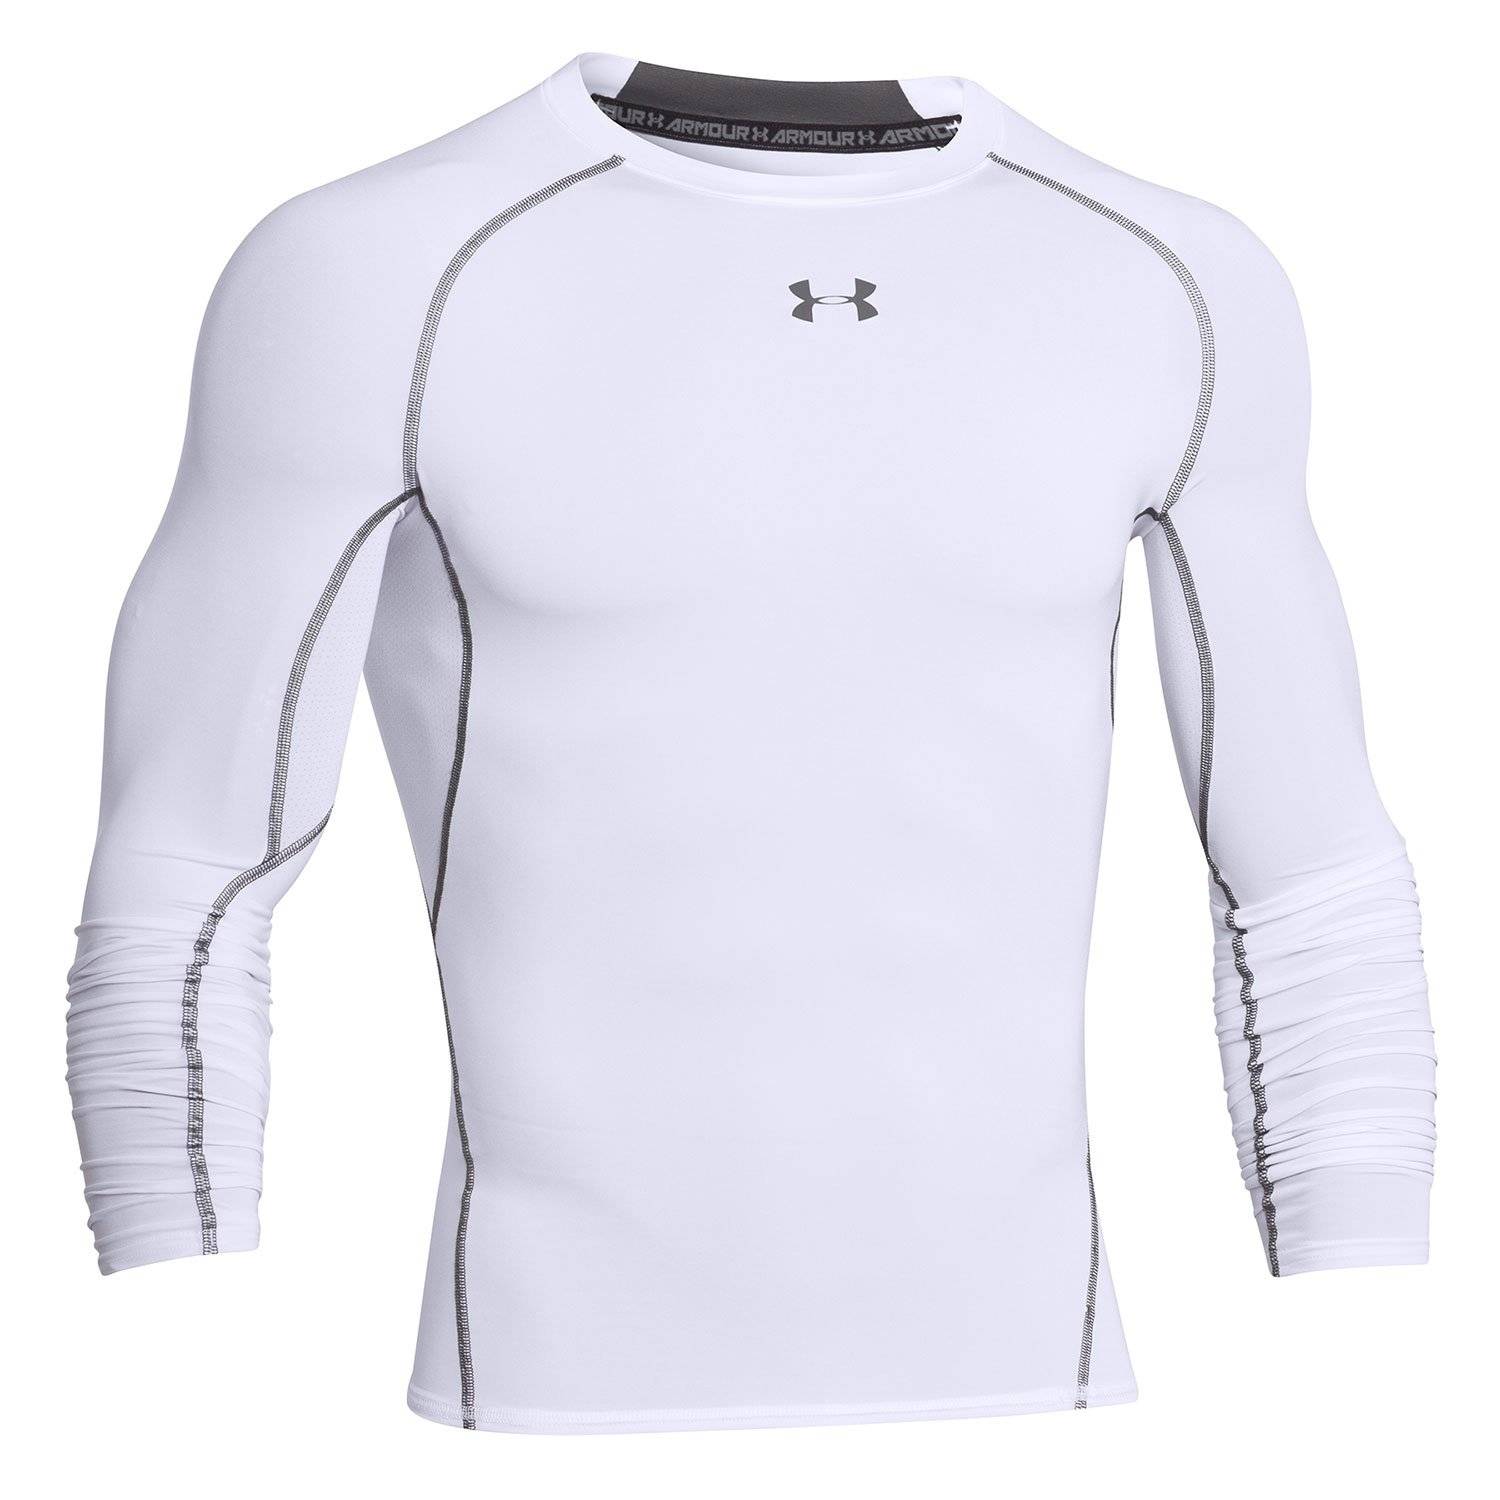 purchase under armour clothing